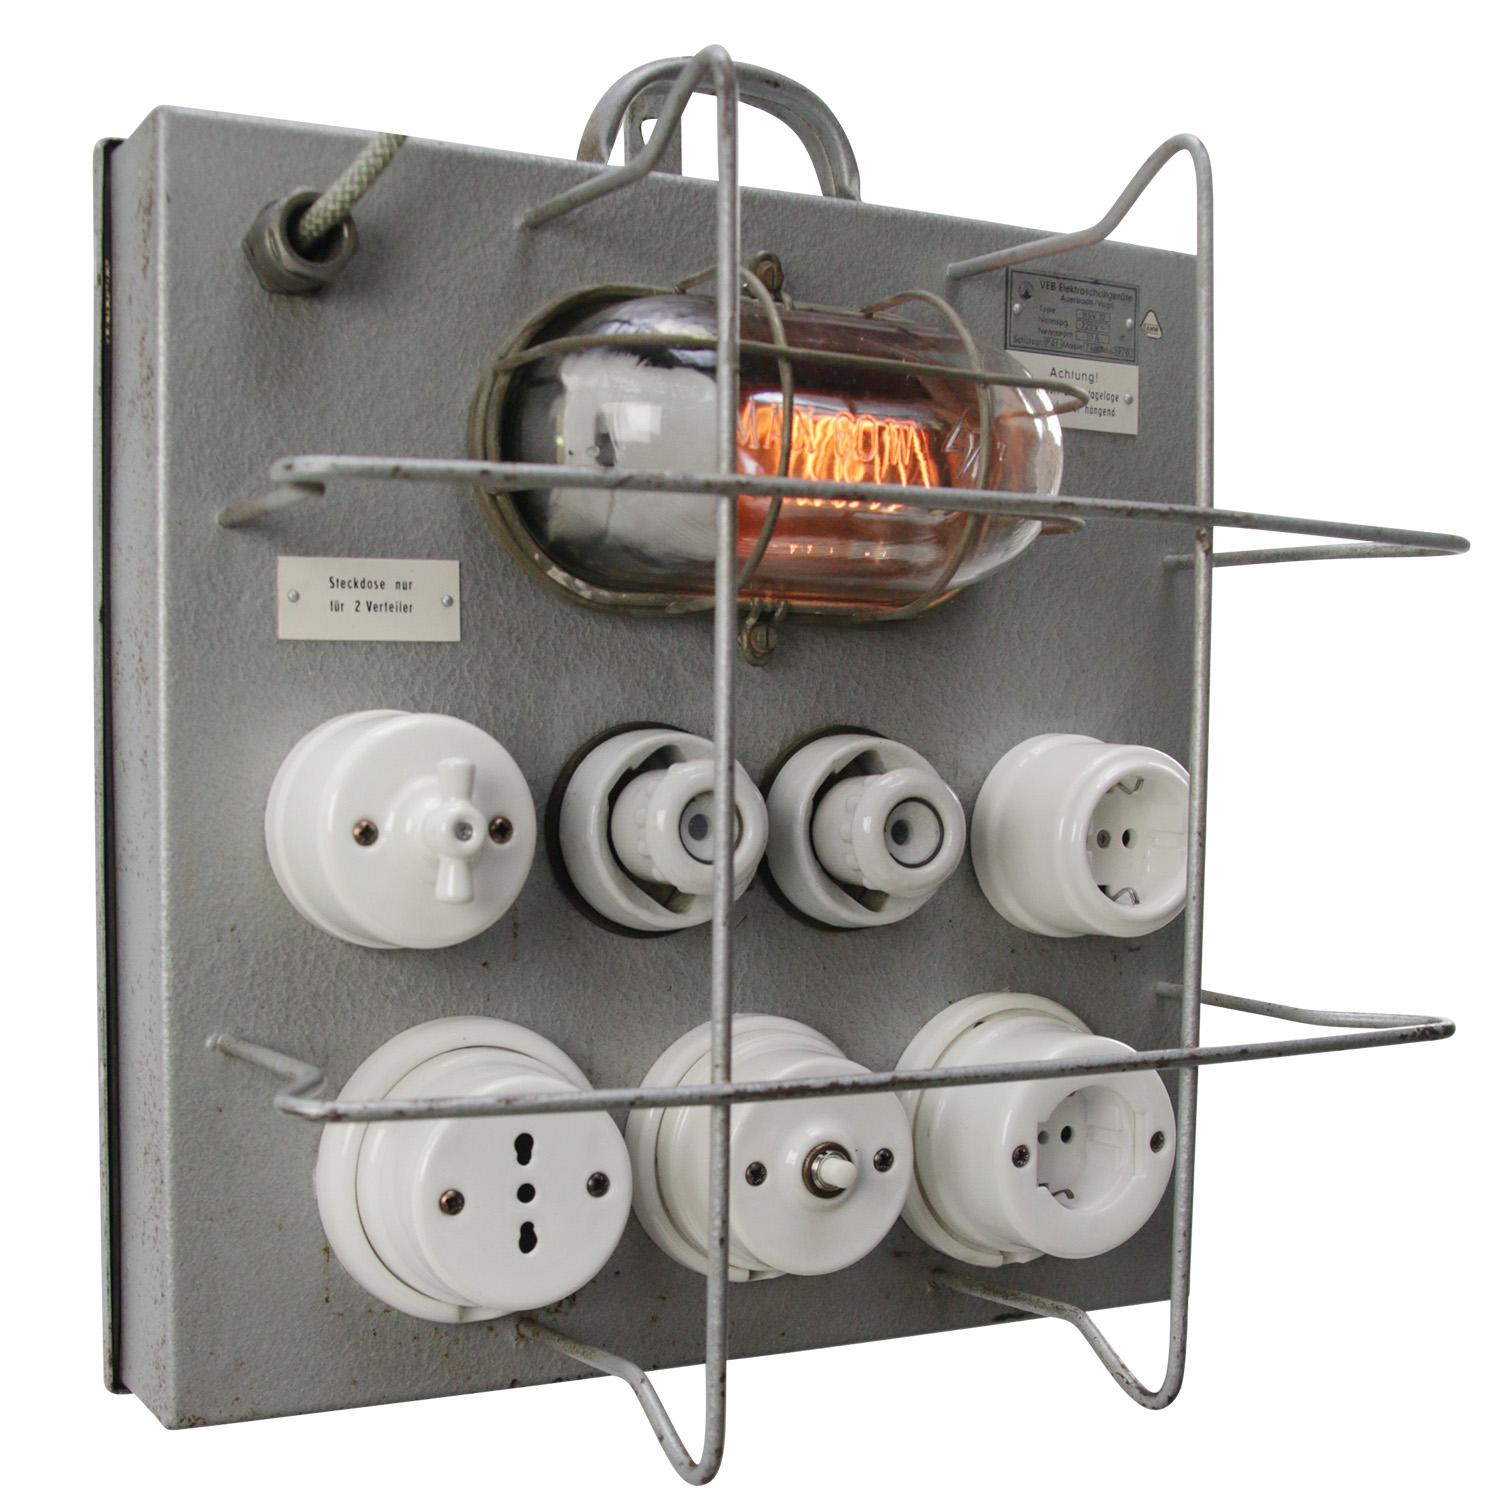 Vintage industrial grey metal control panel
Wall lamp, porcelain switches and plugs

1x E26 / E27

Weight: 5.90 kg / 13 lb

Priced per individual item. All lamps have been made suitable by international standards for incandescent light bulbs,